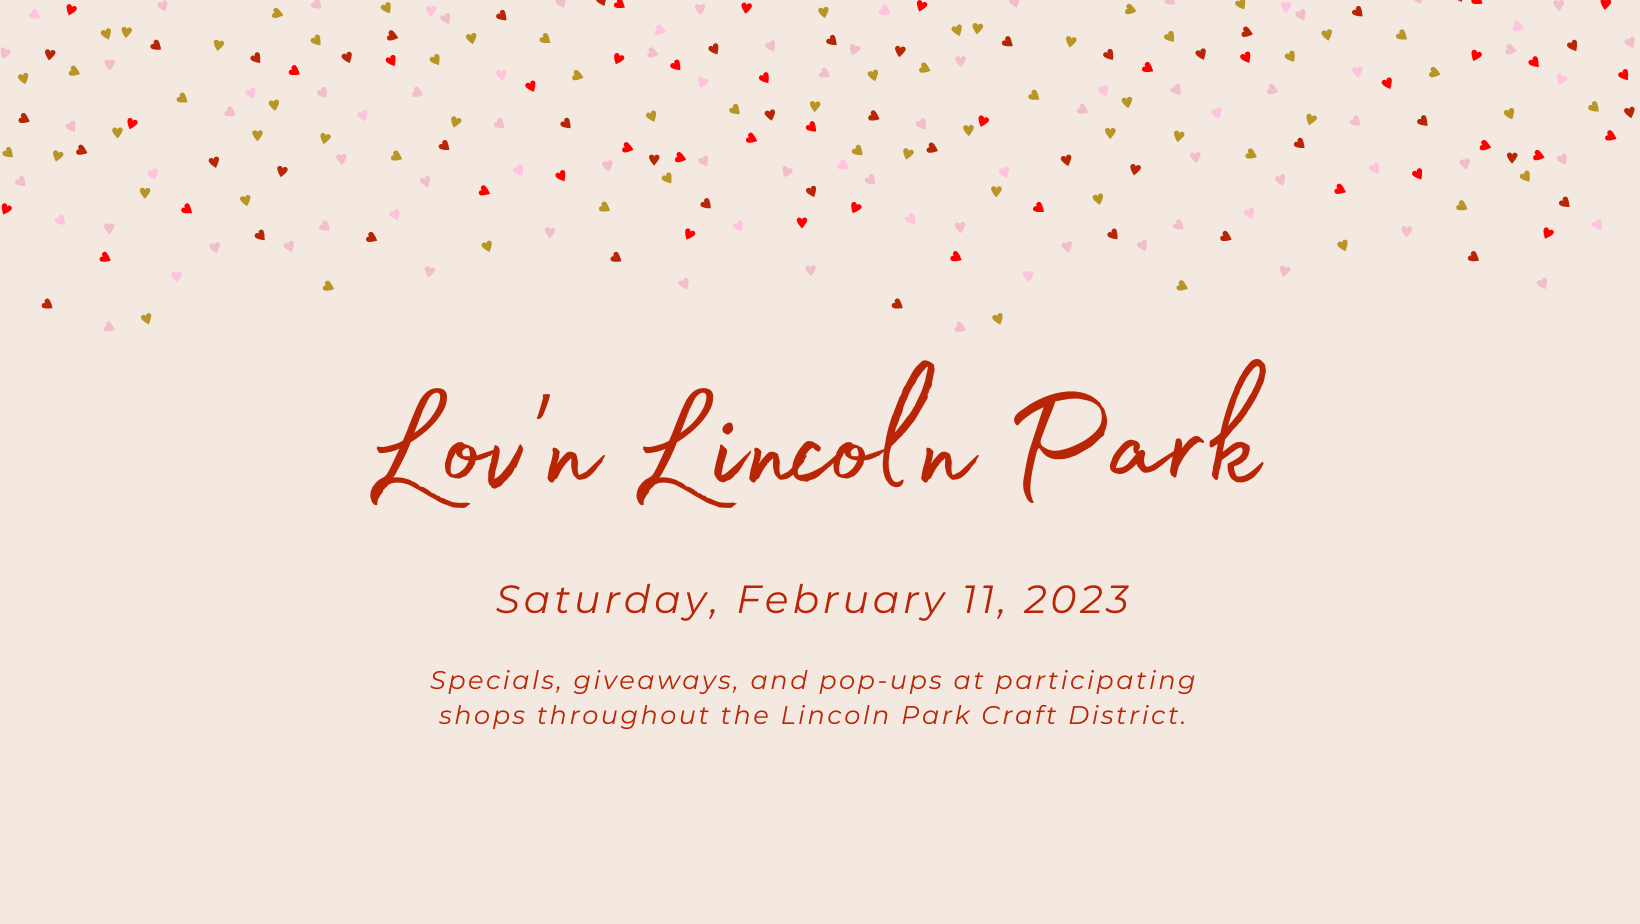 Lov'n Lincoln Park. Specials, giveaways, and pop-ups at participating shops throughout the Lincoln Park Craft District.